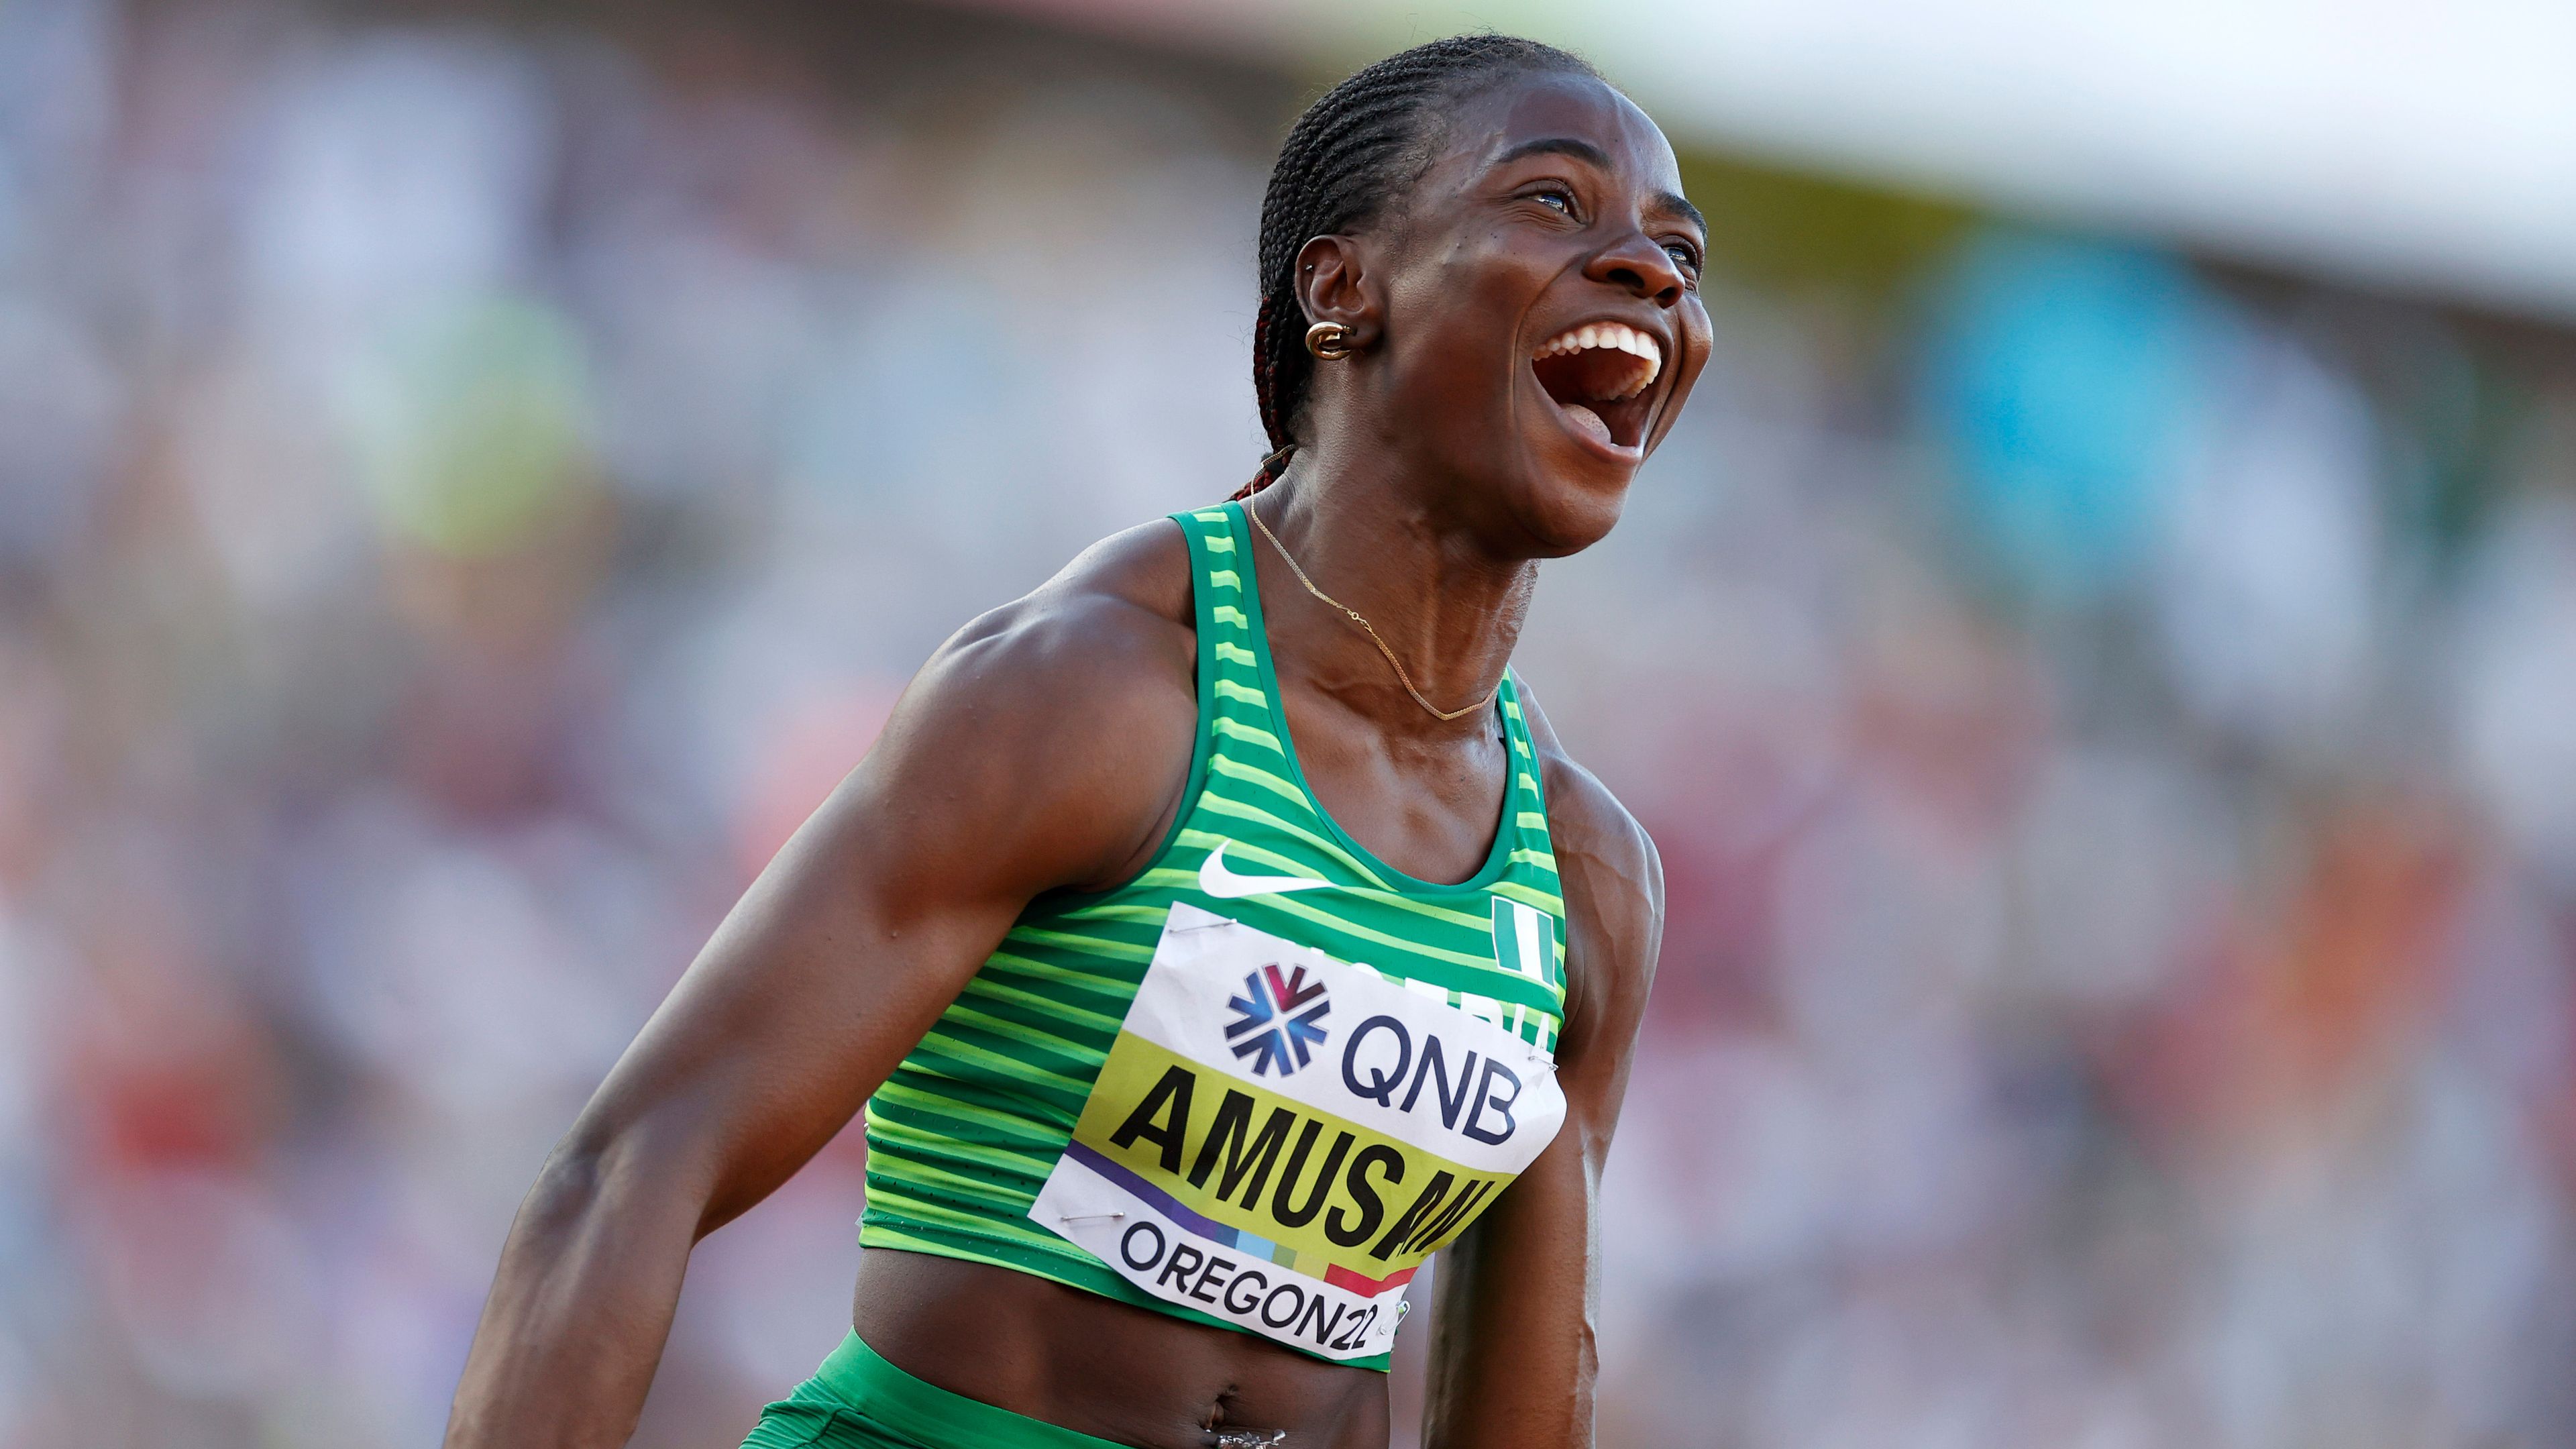 Tobi Amusan of Team Nigeria reacts after winning gold in the Women&#x27;s 100m Hurdles Final on day ten of the World Athletics Championships Oregon22 at Hayward Field on July 24, 2022 in Eugene, Oregon. (Photo by Steph Chambers/Getty Images)